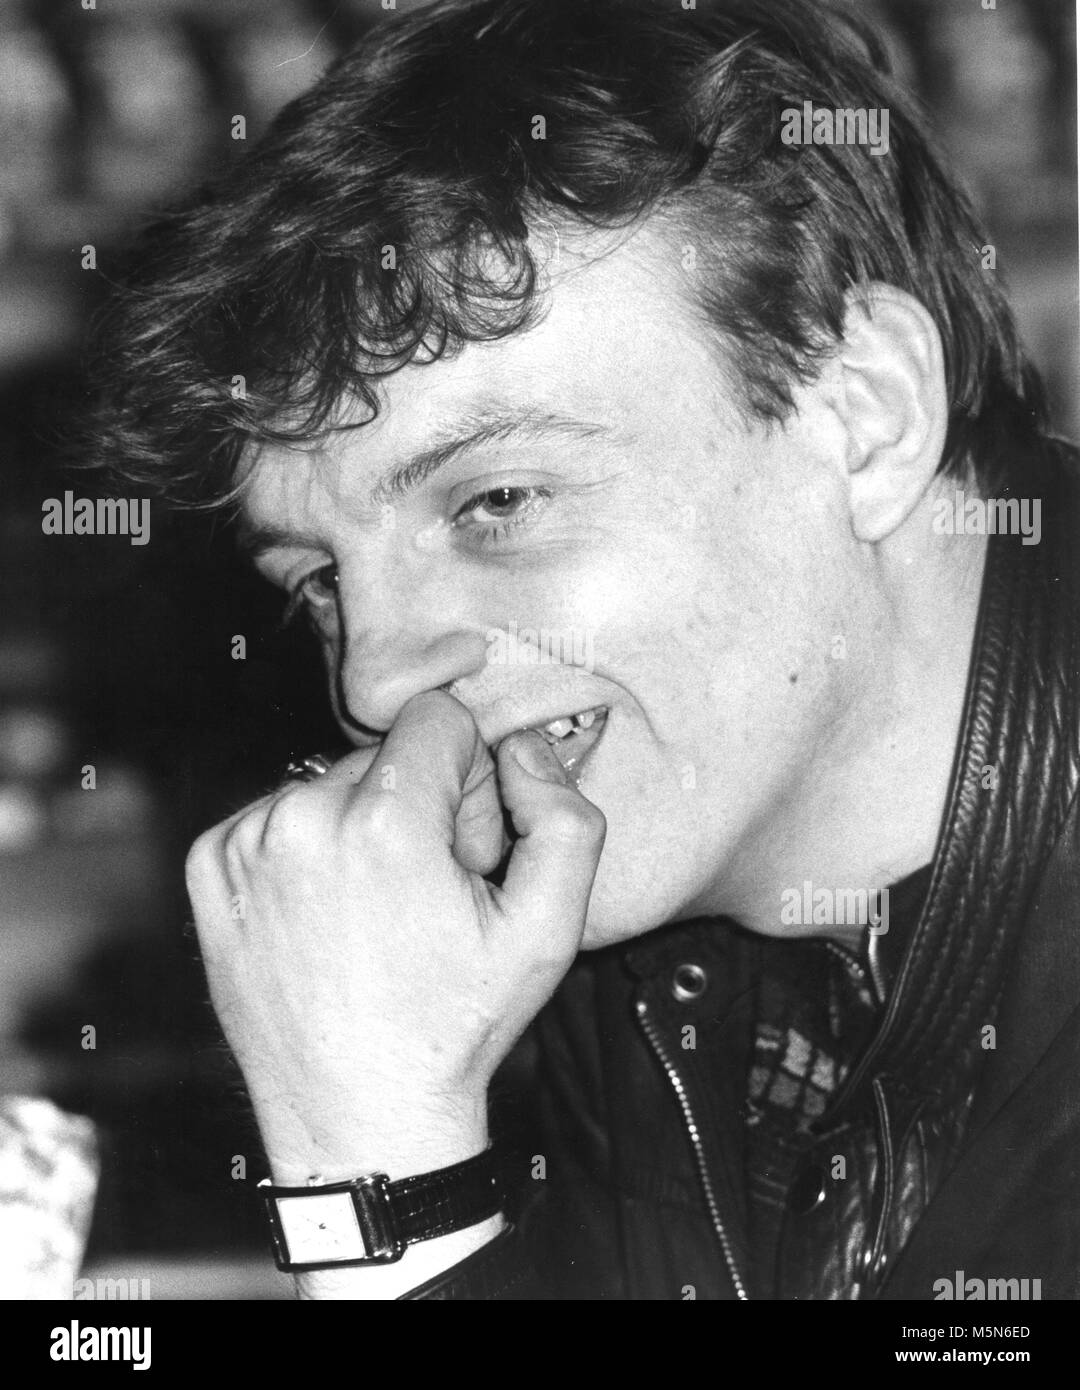 Mark E Smith of The Fall promoting their album 'The Frenz Experiment' at HMV Oxford St.  London, 1988   THE FALL SINGER MARK E. SMITH DEAD Influential British rocker MARK E. SMITH has died, aged 60. The Fall frontman died at his home in England on Wednesday morning (24Jan18), according to a statement from the band's manager Pam Van Damned, who also asked the media and fans to be respectful of his family's privacy. Smith had been been ill for quite some some time and The Fall were forced to cancel a number of shows recently. He performed at gigs in England late last year (17) from a wheelchair. Stock Photo